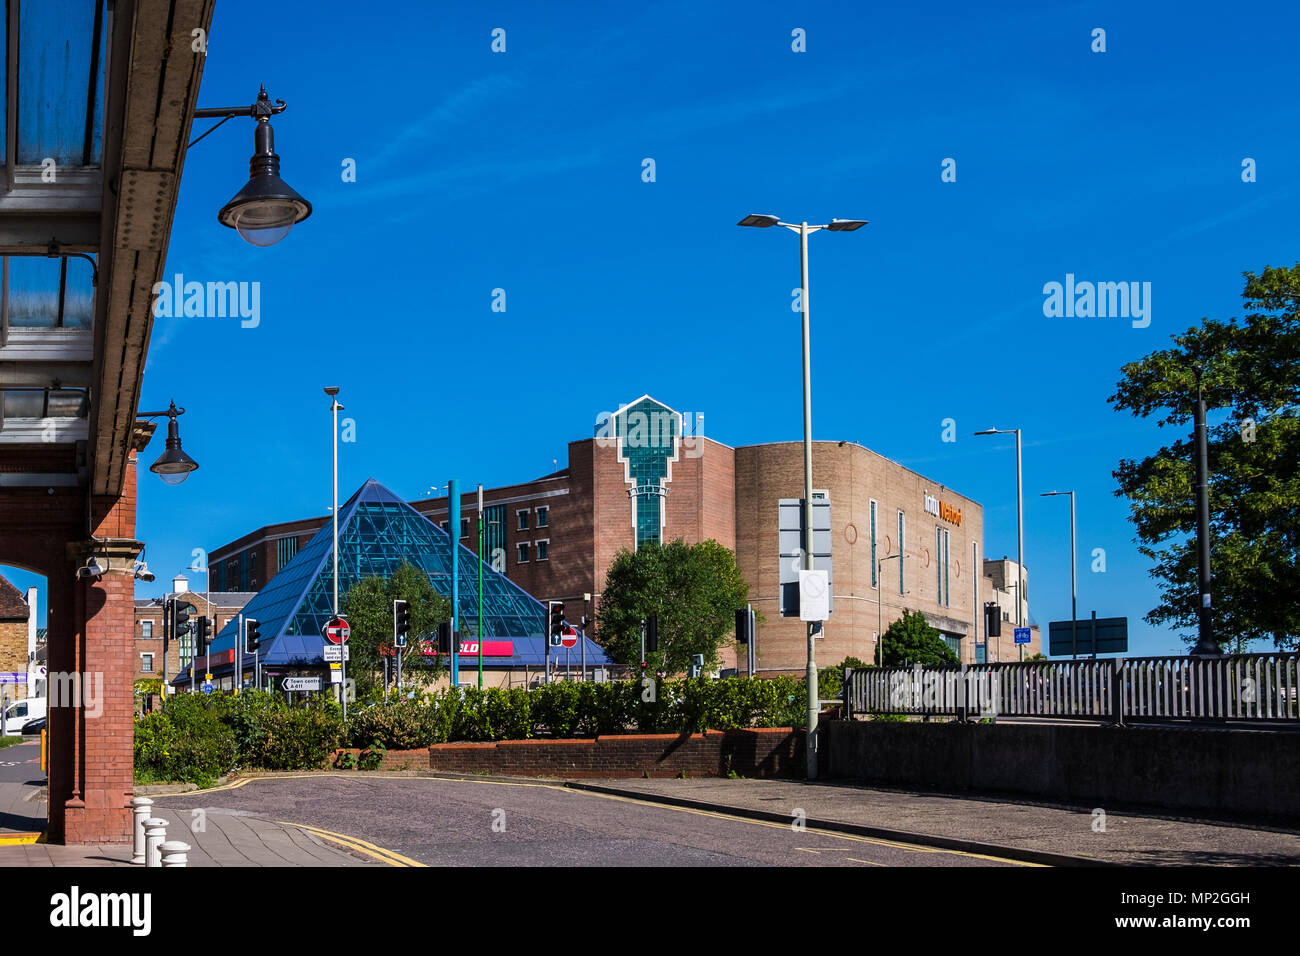 Intu shopping centre, Watford, Hertfordshire, Angleterre, Royaume-Uni Banque D'Images